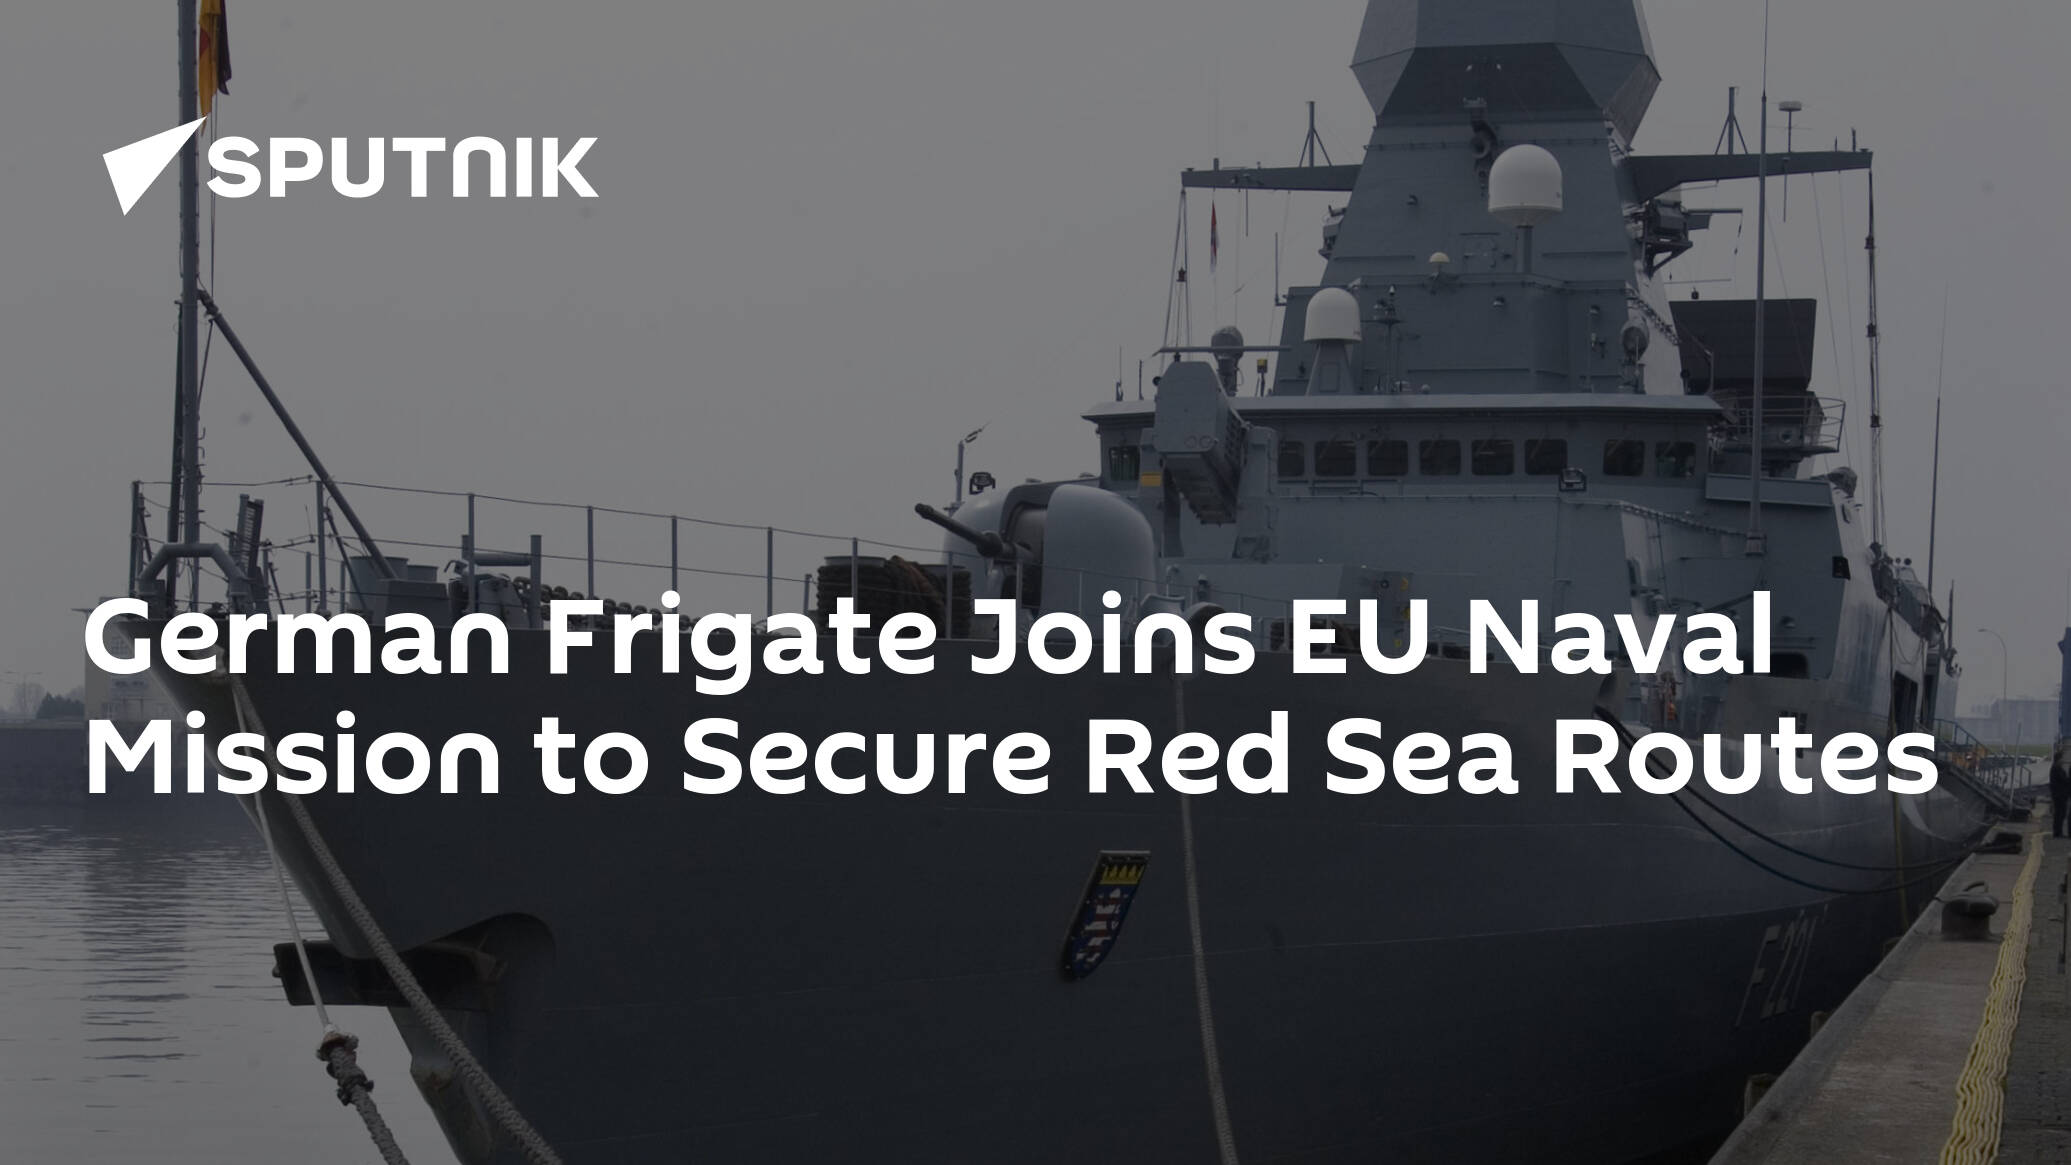 German Frigate Joins EU Naval Mission to Secure Red Sea Routes